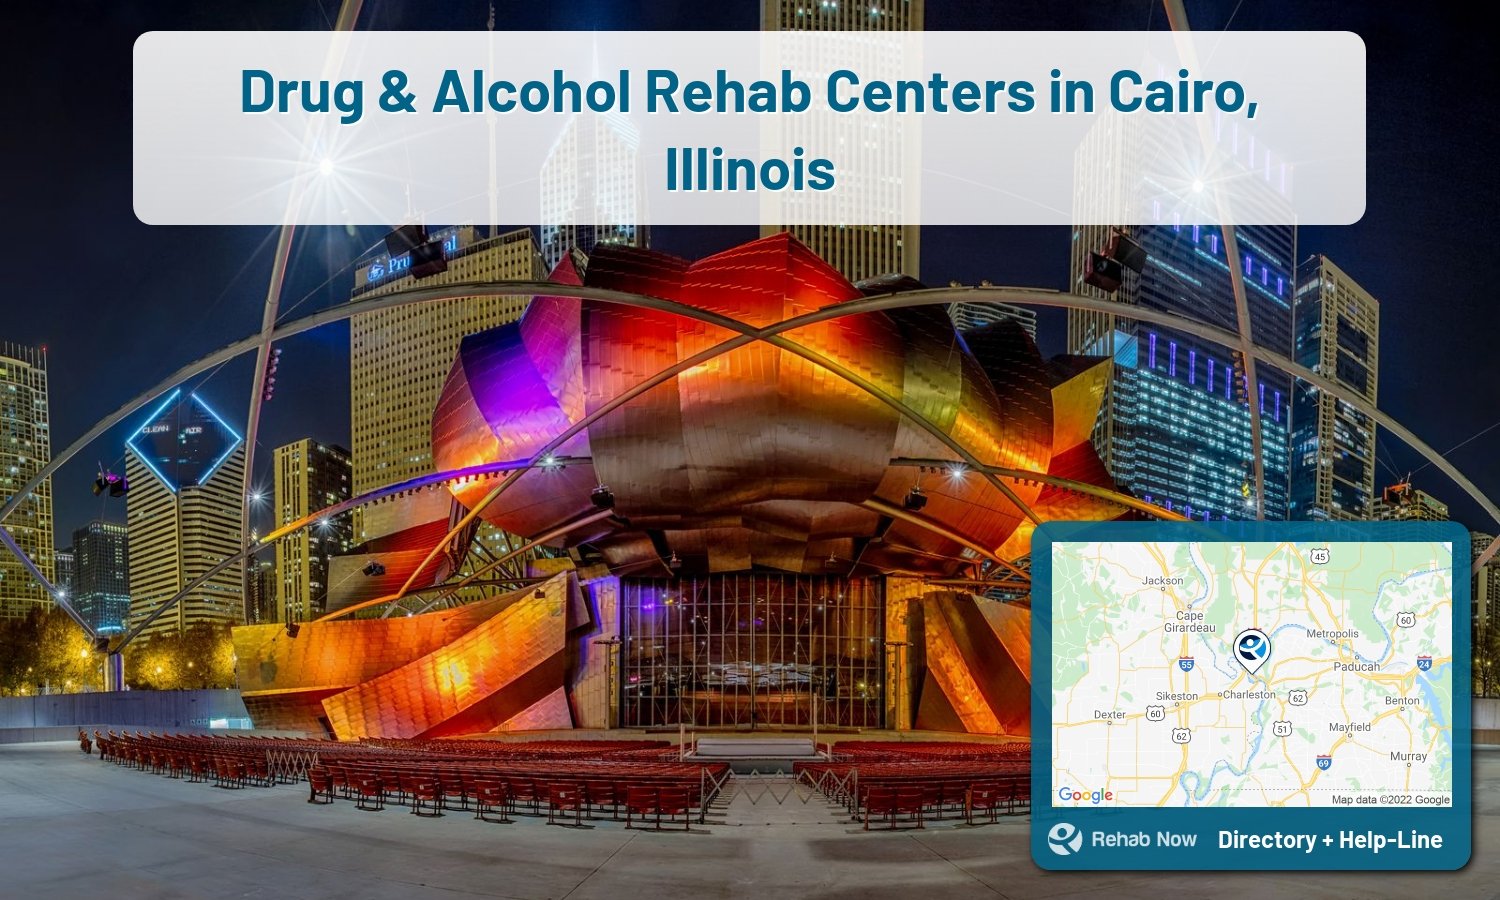 Cairo, IL Treatment Centers. Find drug rehab in Cairo, Illinois, or detox and treatment programs. Get the right help now!